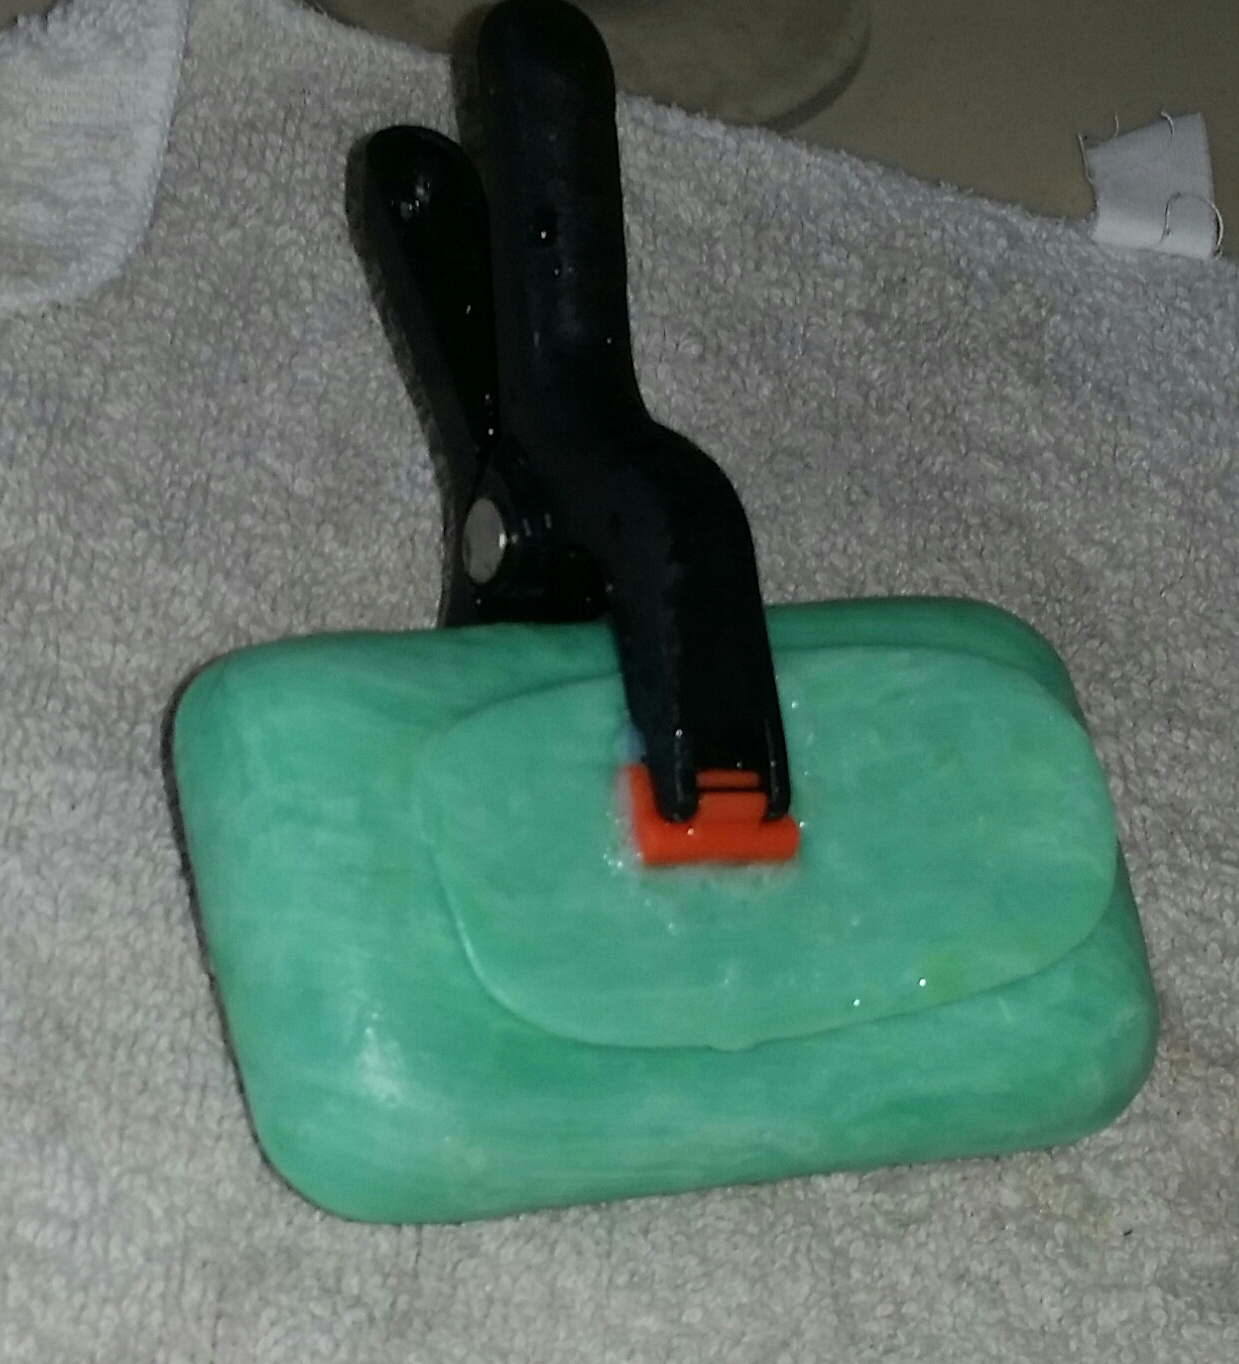 soap clamp